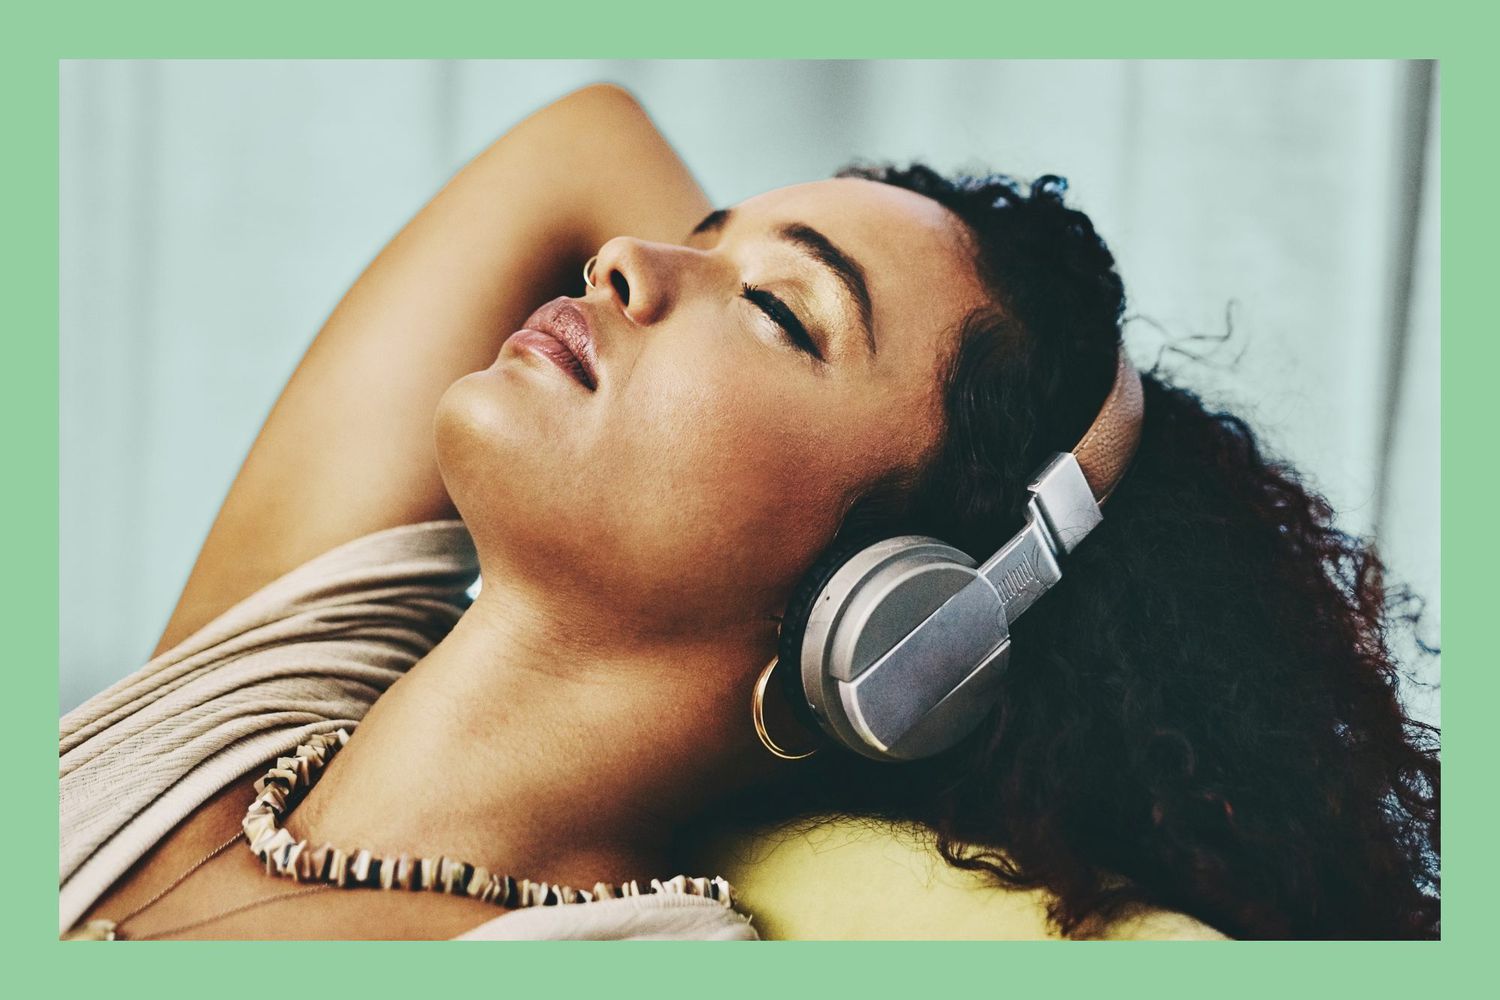 close up shot of a young woman wearing headphones while relaxing at home with eyes closed